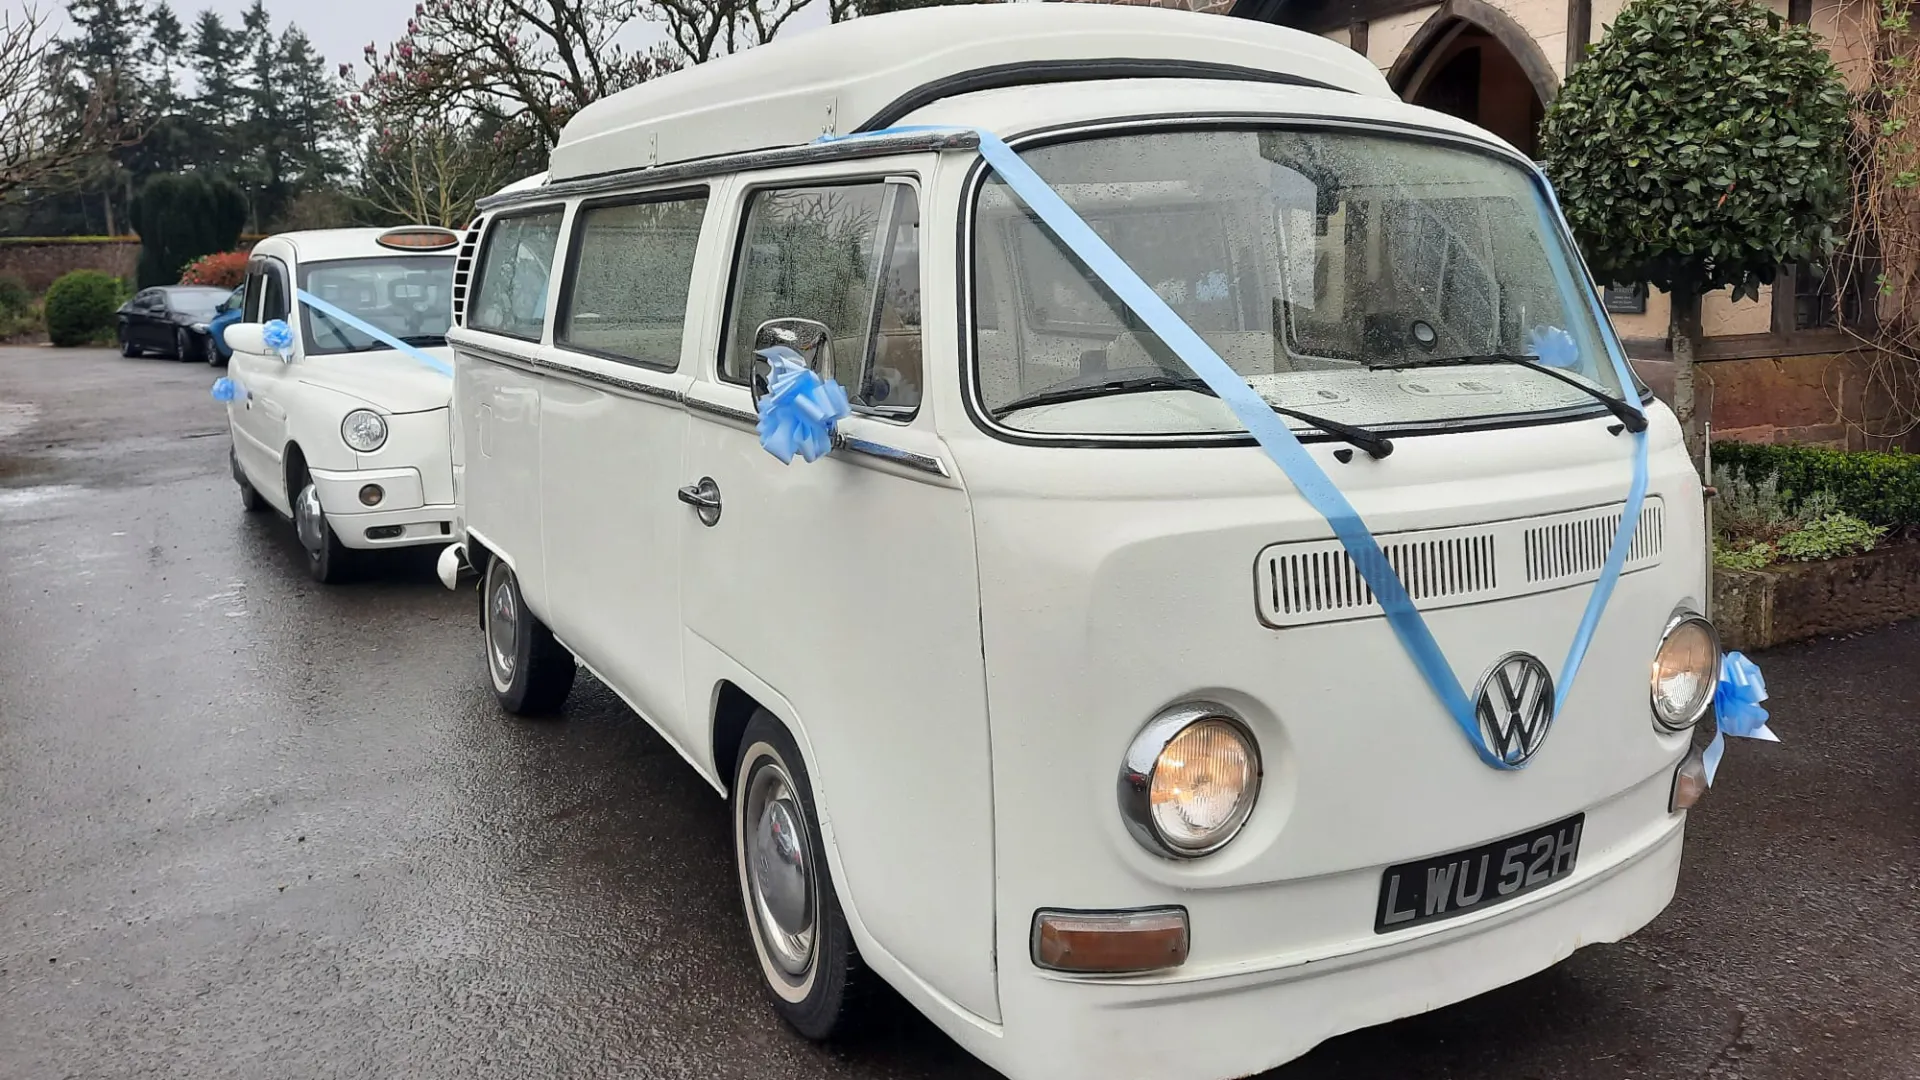 Classic Volkswagen Baywindow Campervan decorated with Blue Ribbons folowed by a Taxi Cab with Matching Blue Ribbons